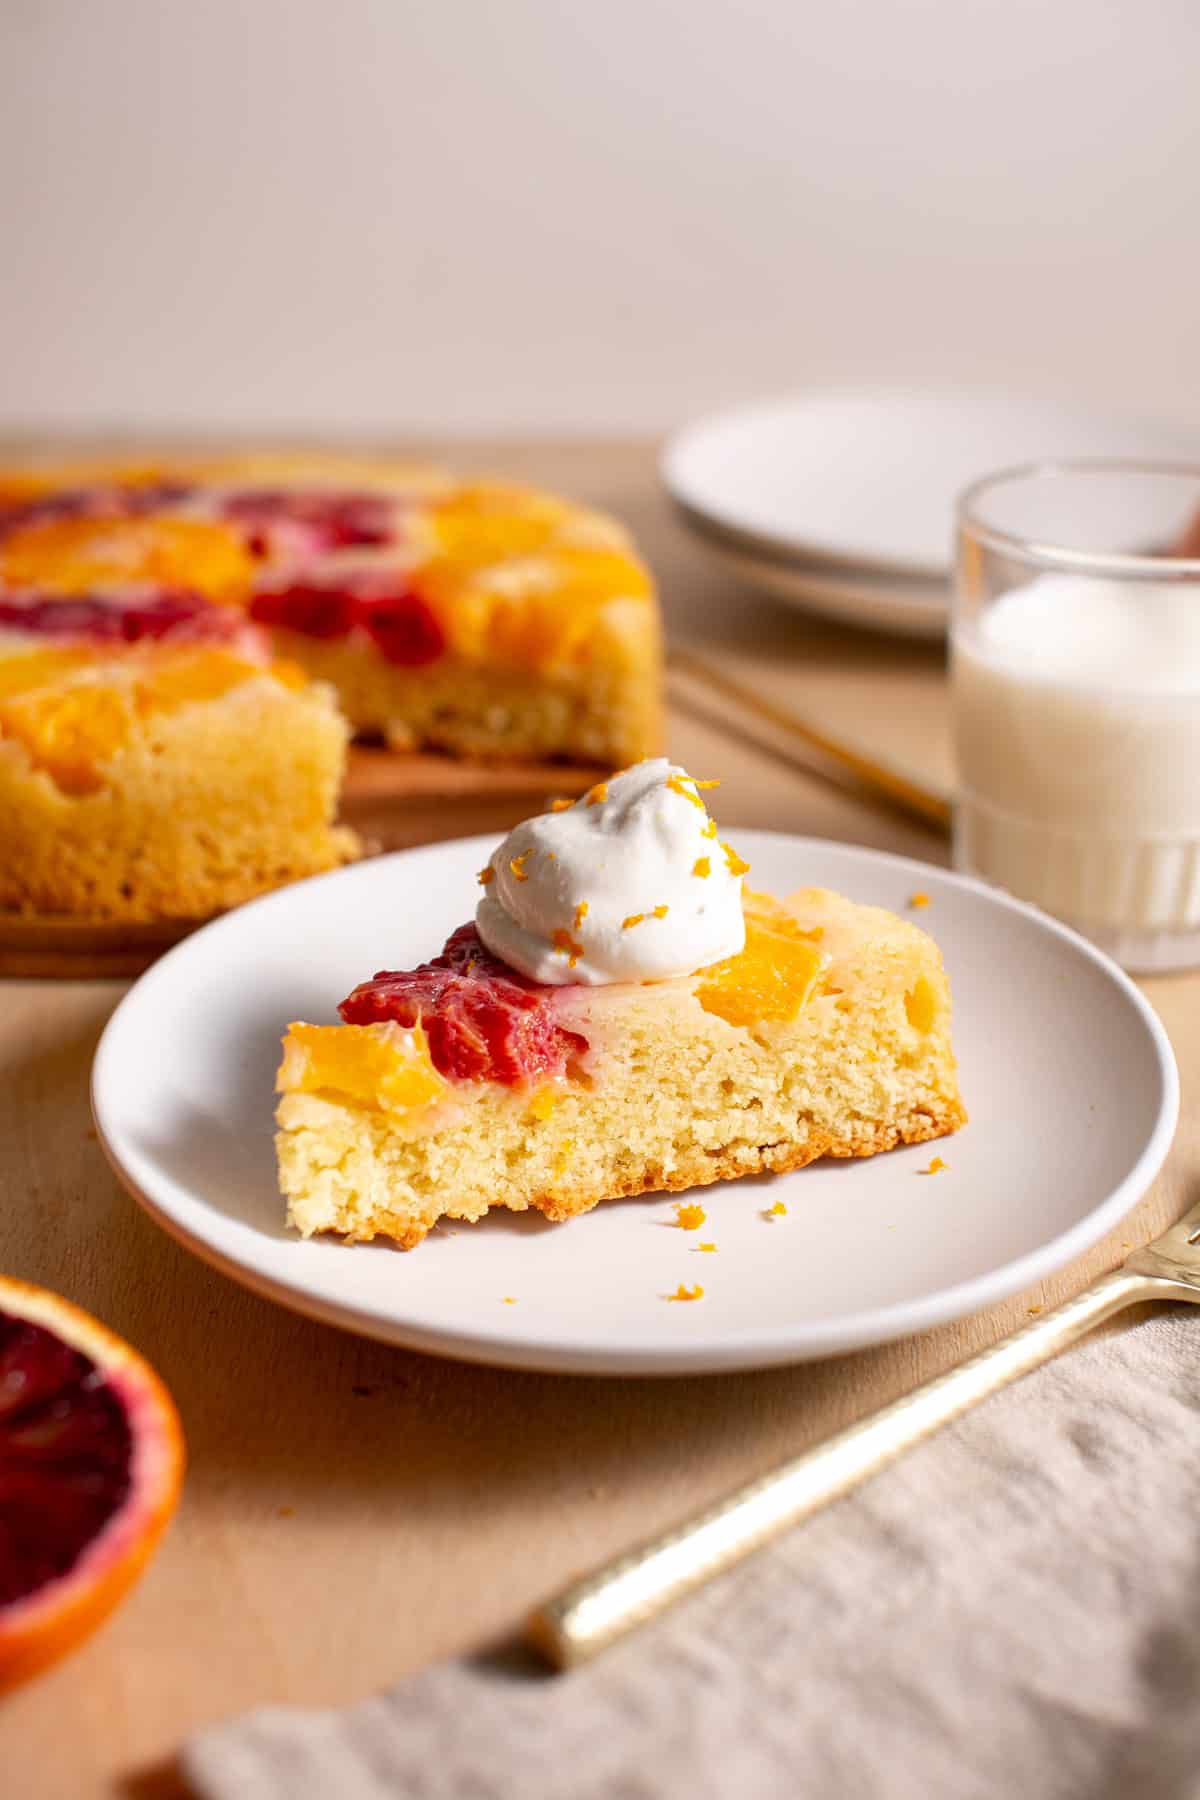 A slice of winter citrus cake with a dollop of whipped cream.